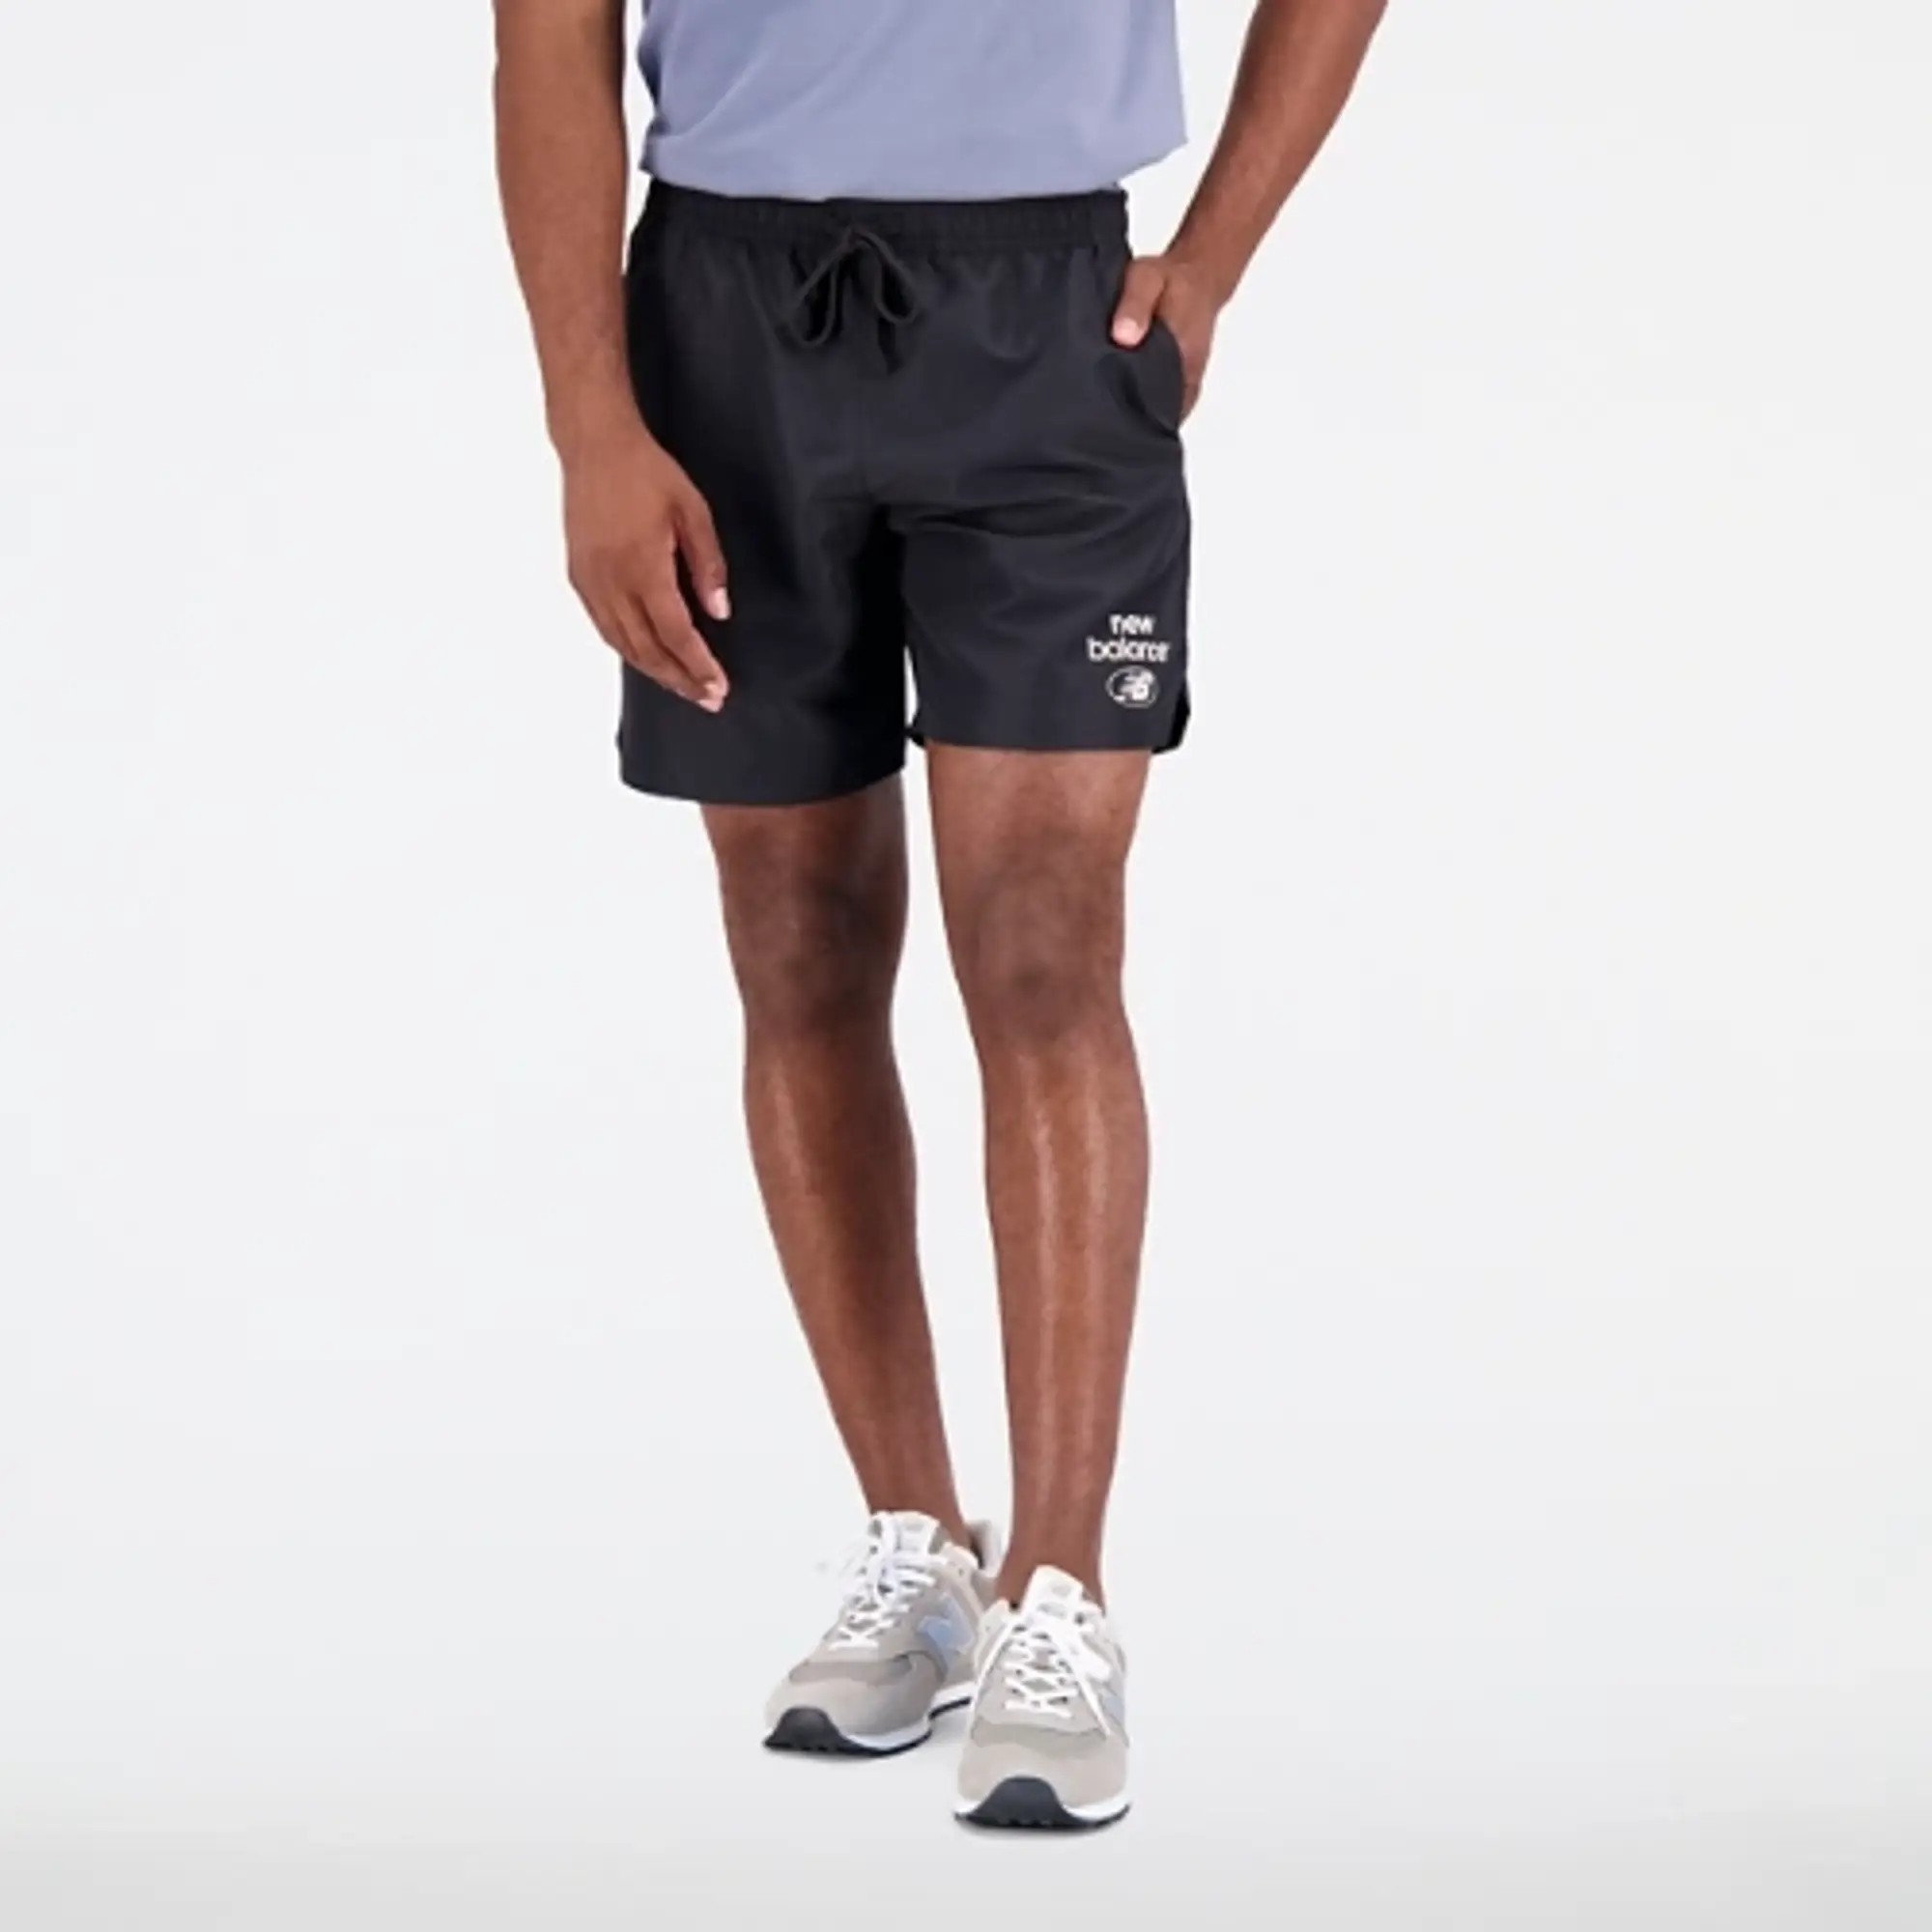 New Balance Men's Essentials Reimagined Woven Short in Black Polywoven